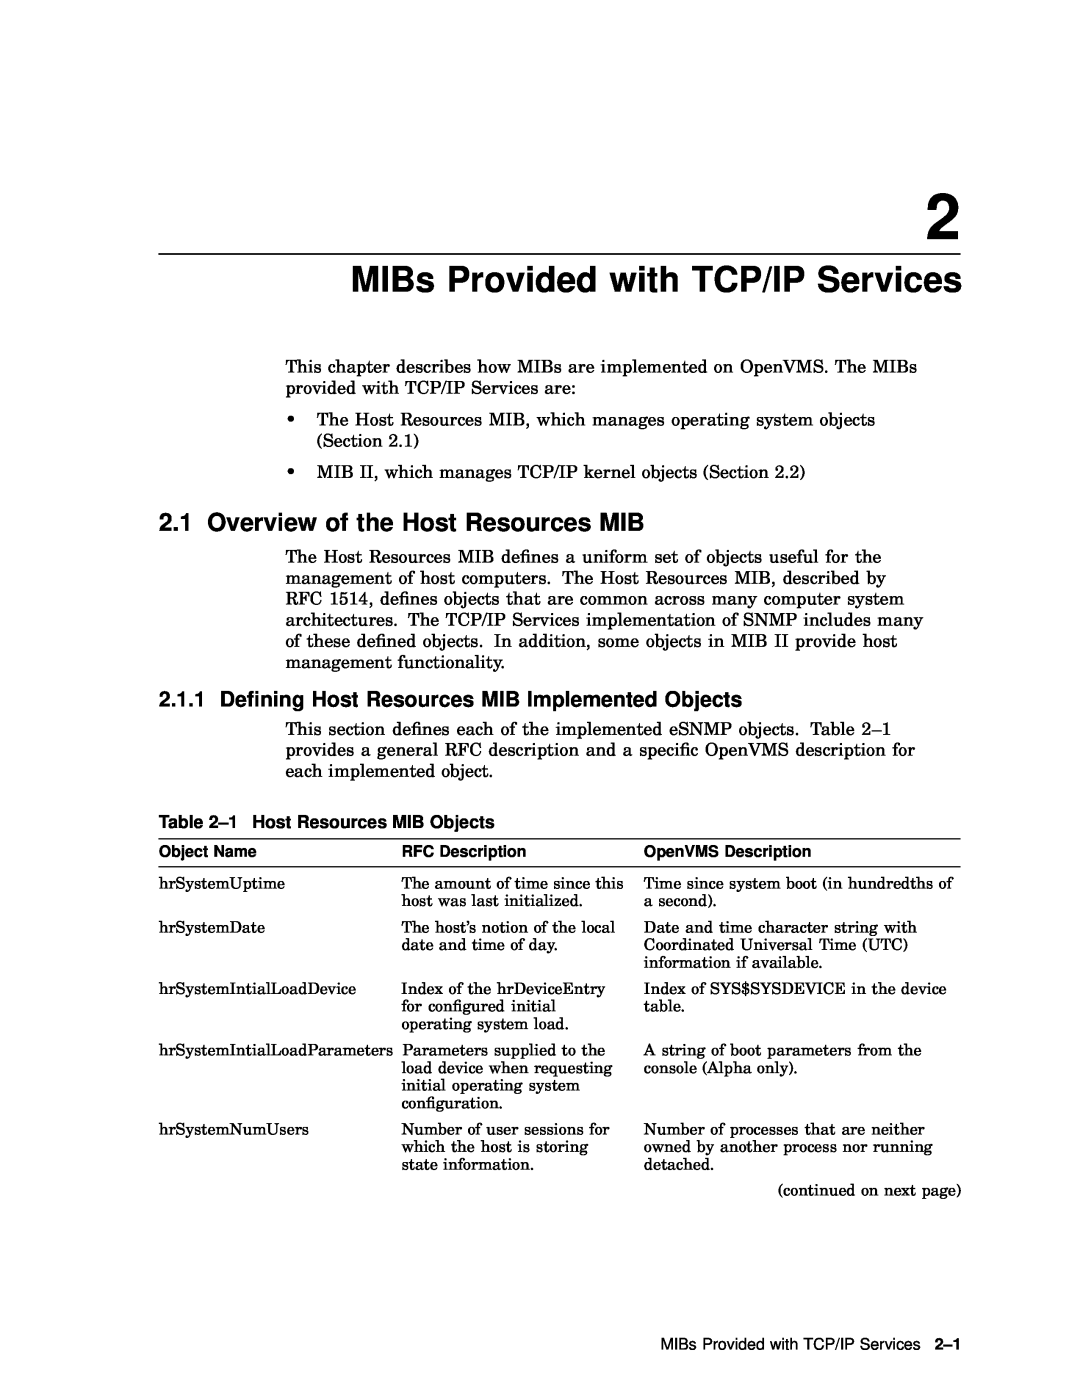 Compaq AAR04BCTE MIBs Provided with TCP/IP Services, Overview of the Host Resources MIB, 1 Host Resources MIB Objects 